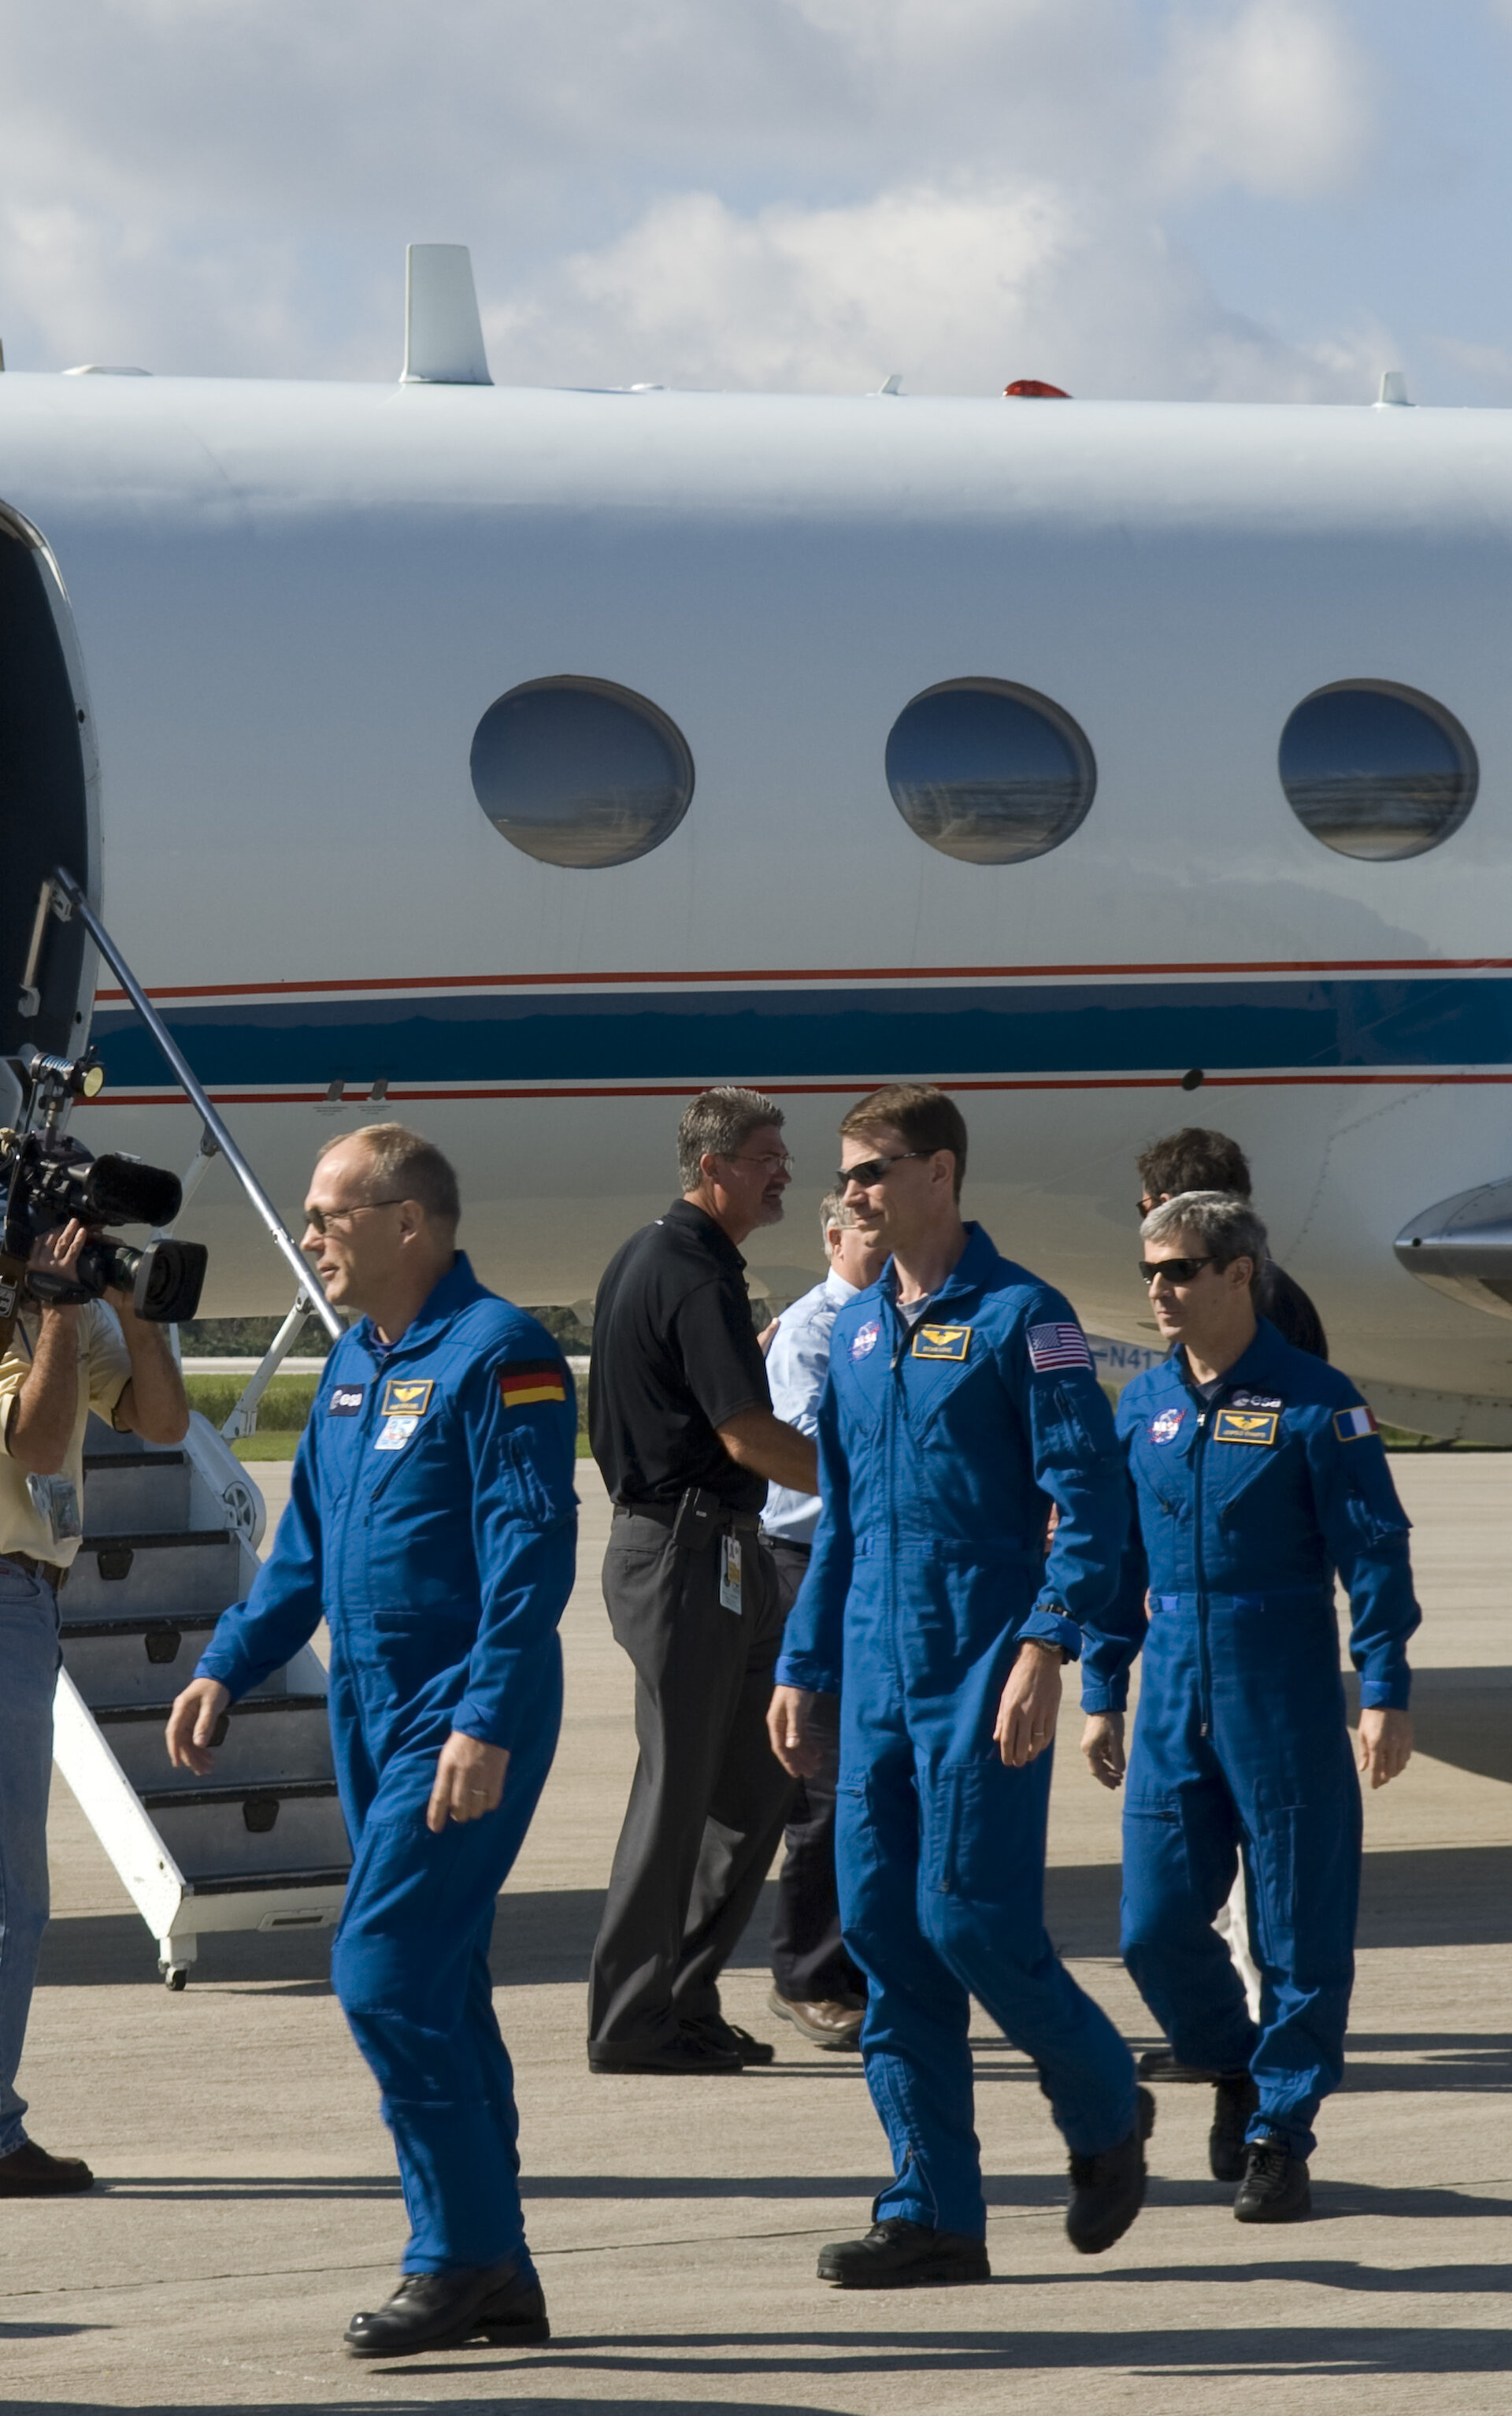 STS-122 mission crew arrive at NASA's Kennedy Space Center, Florida, ahead of their mission to deliver the European Columbus lab